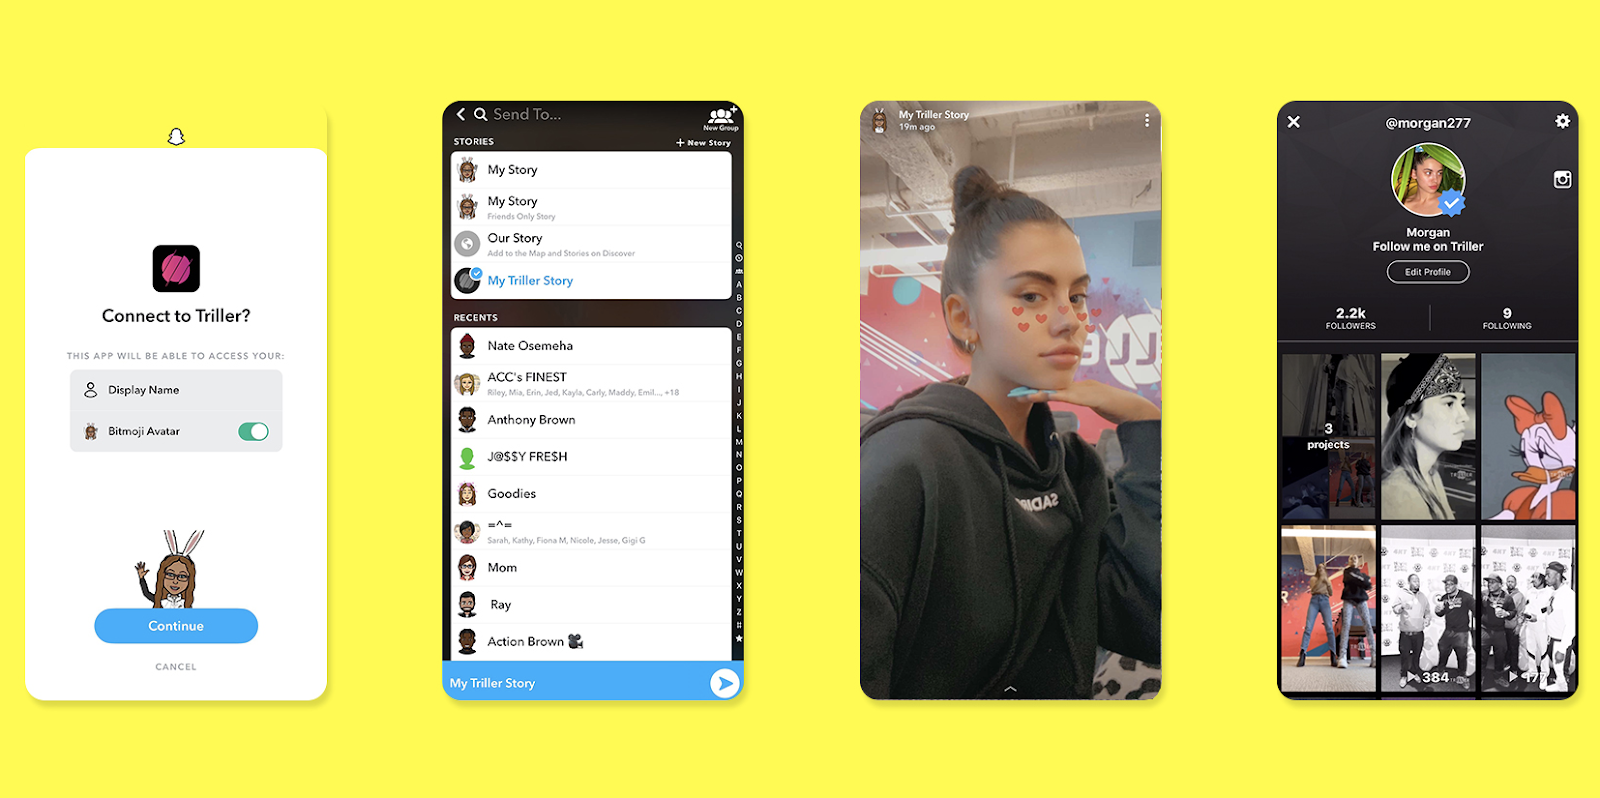 Snapchat: The App to Share Moments, Play Games, and Track People